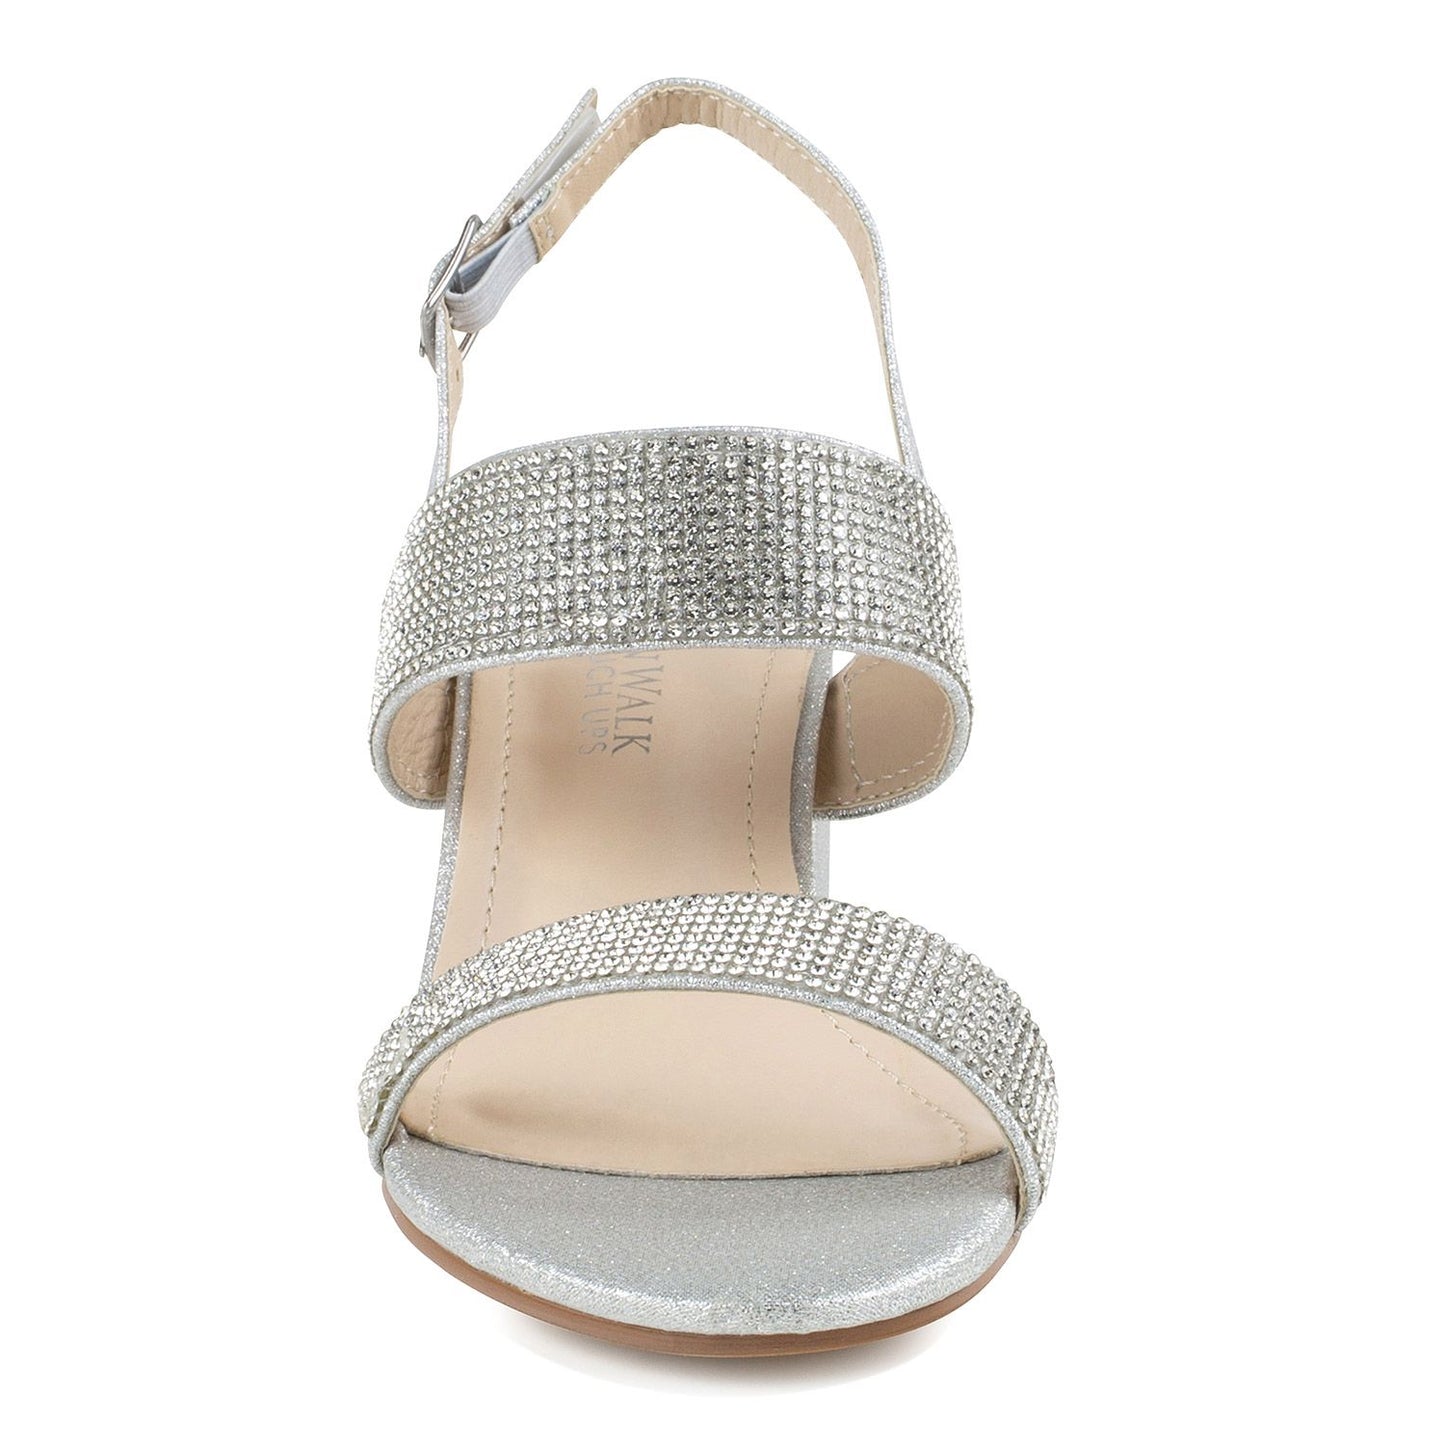 FRONT VIEW OF SILVER GLITTER SHOE WITH WIDE BANDS AND 2 INCH BLOCK HEEL